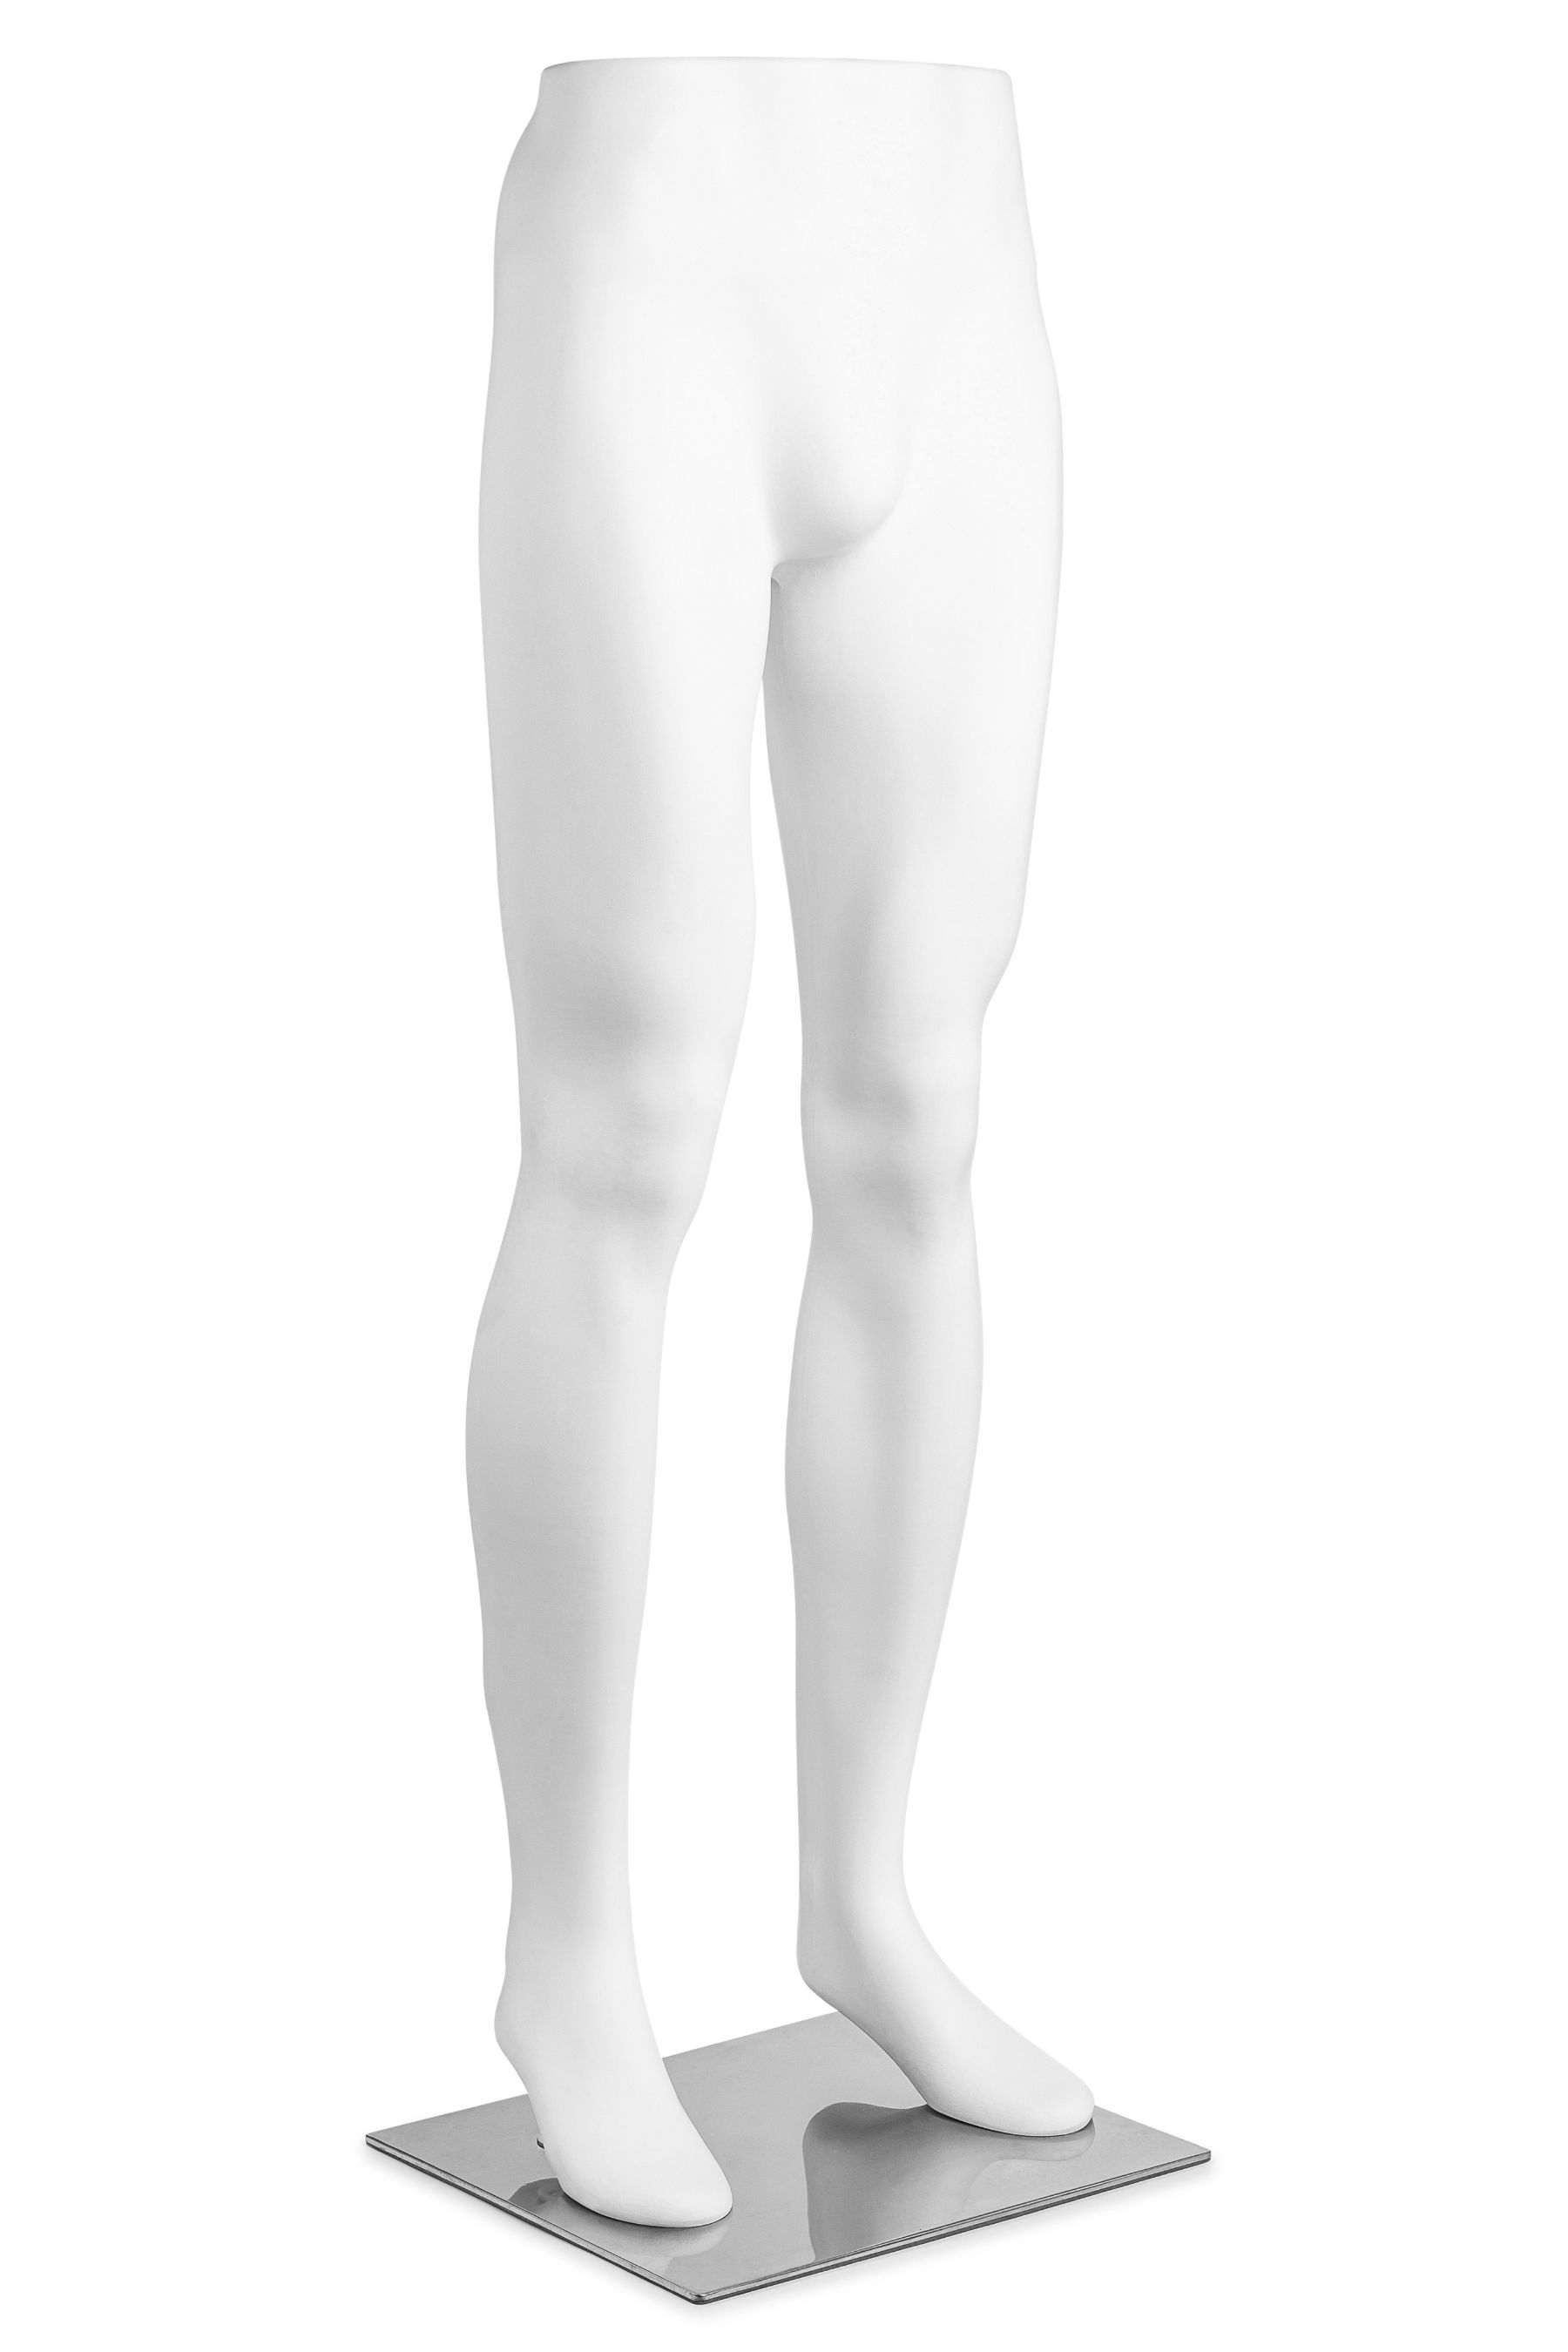 Male Plastic Mannequin Leg Form Height 46 with Base 